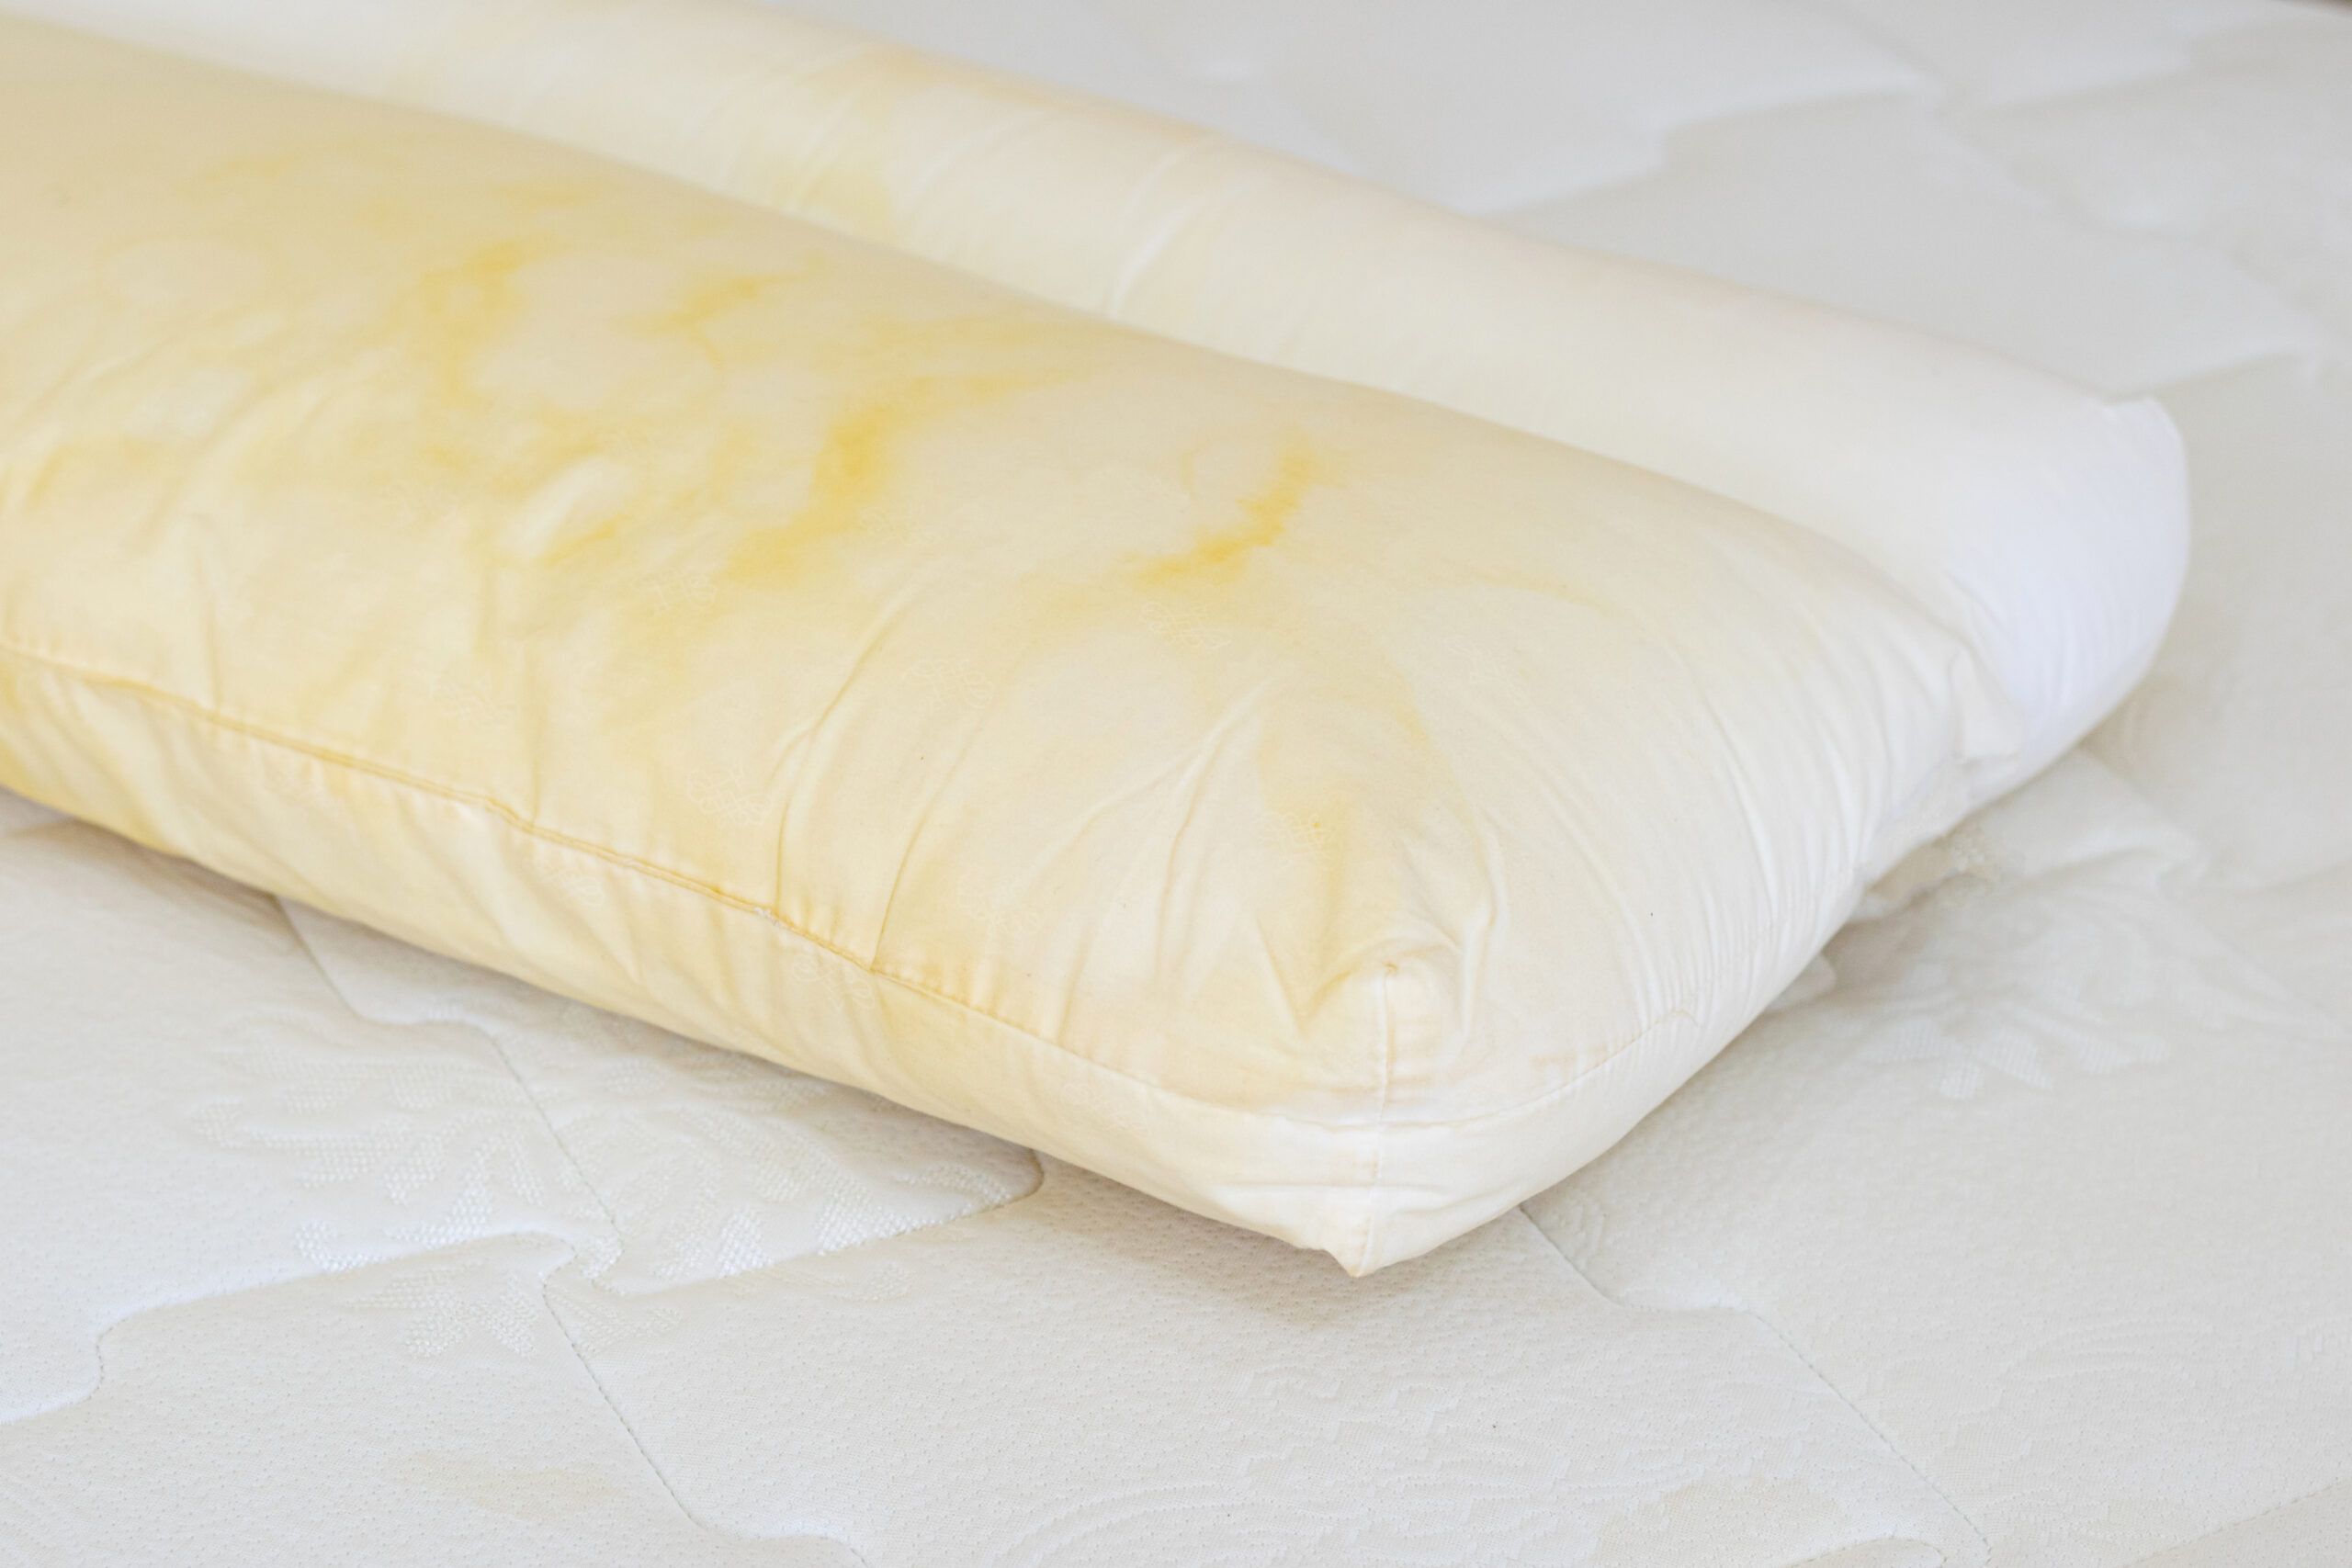 White pillow with yellow stains from use